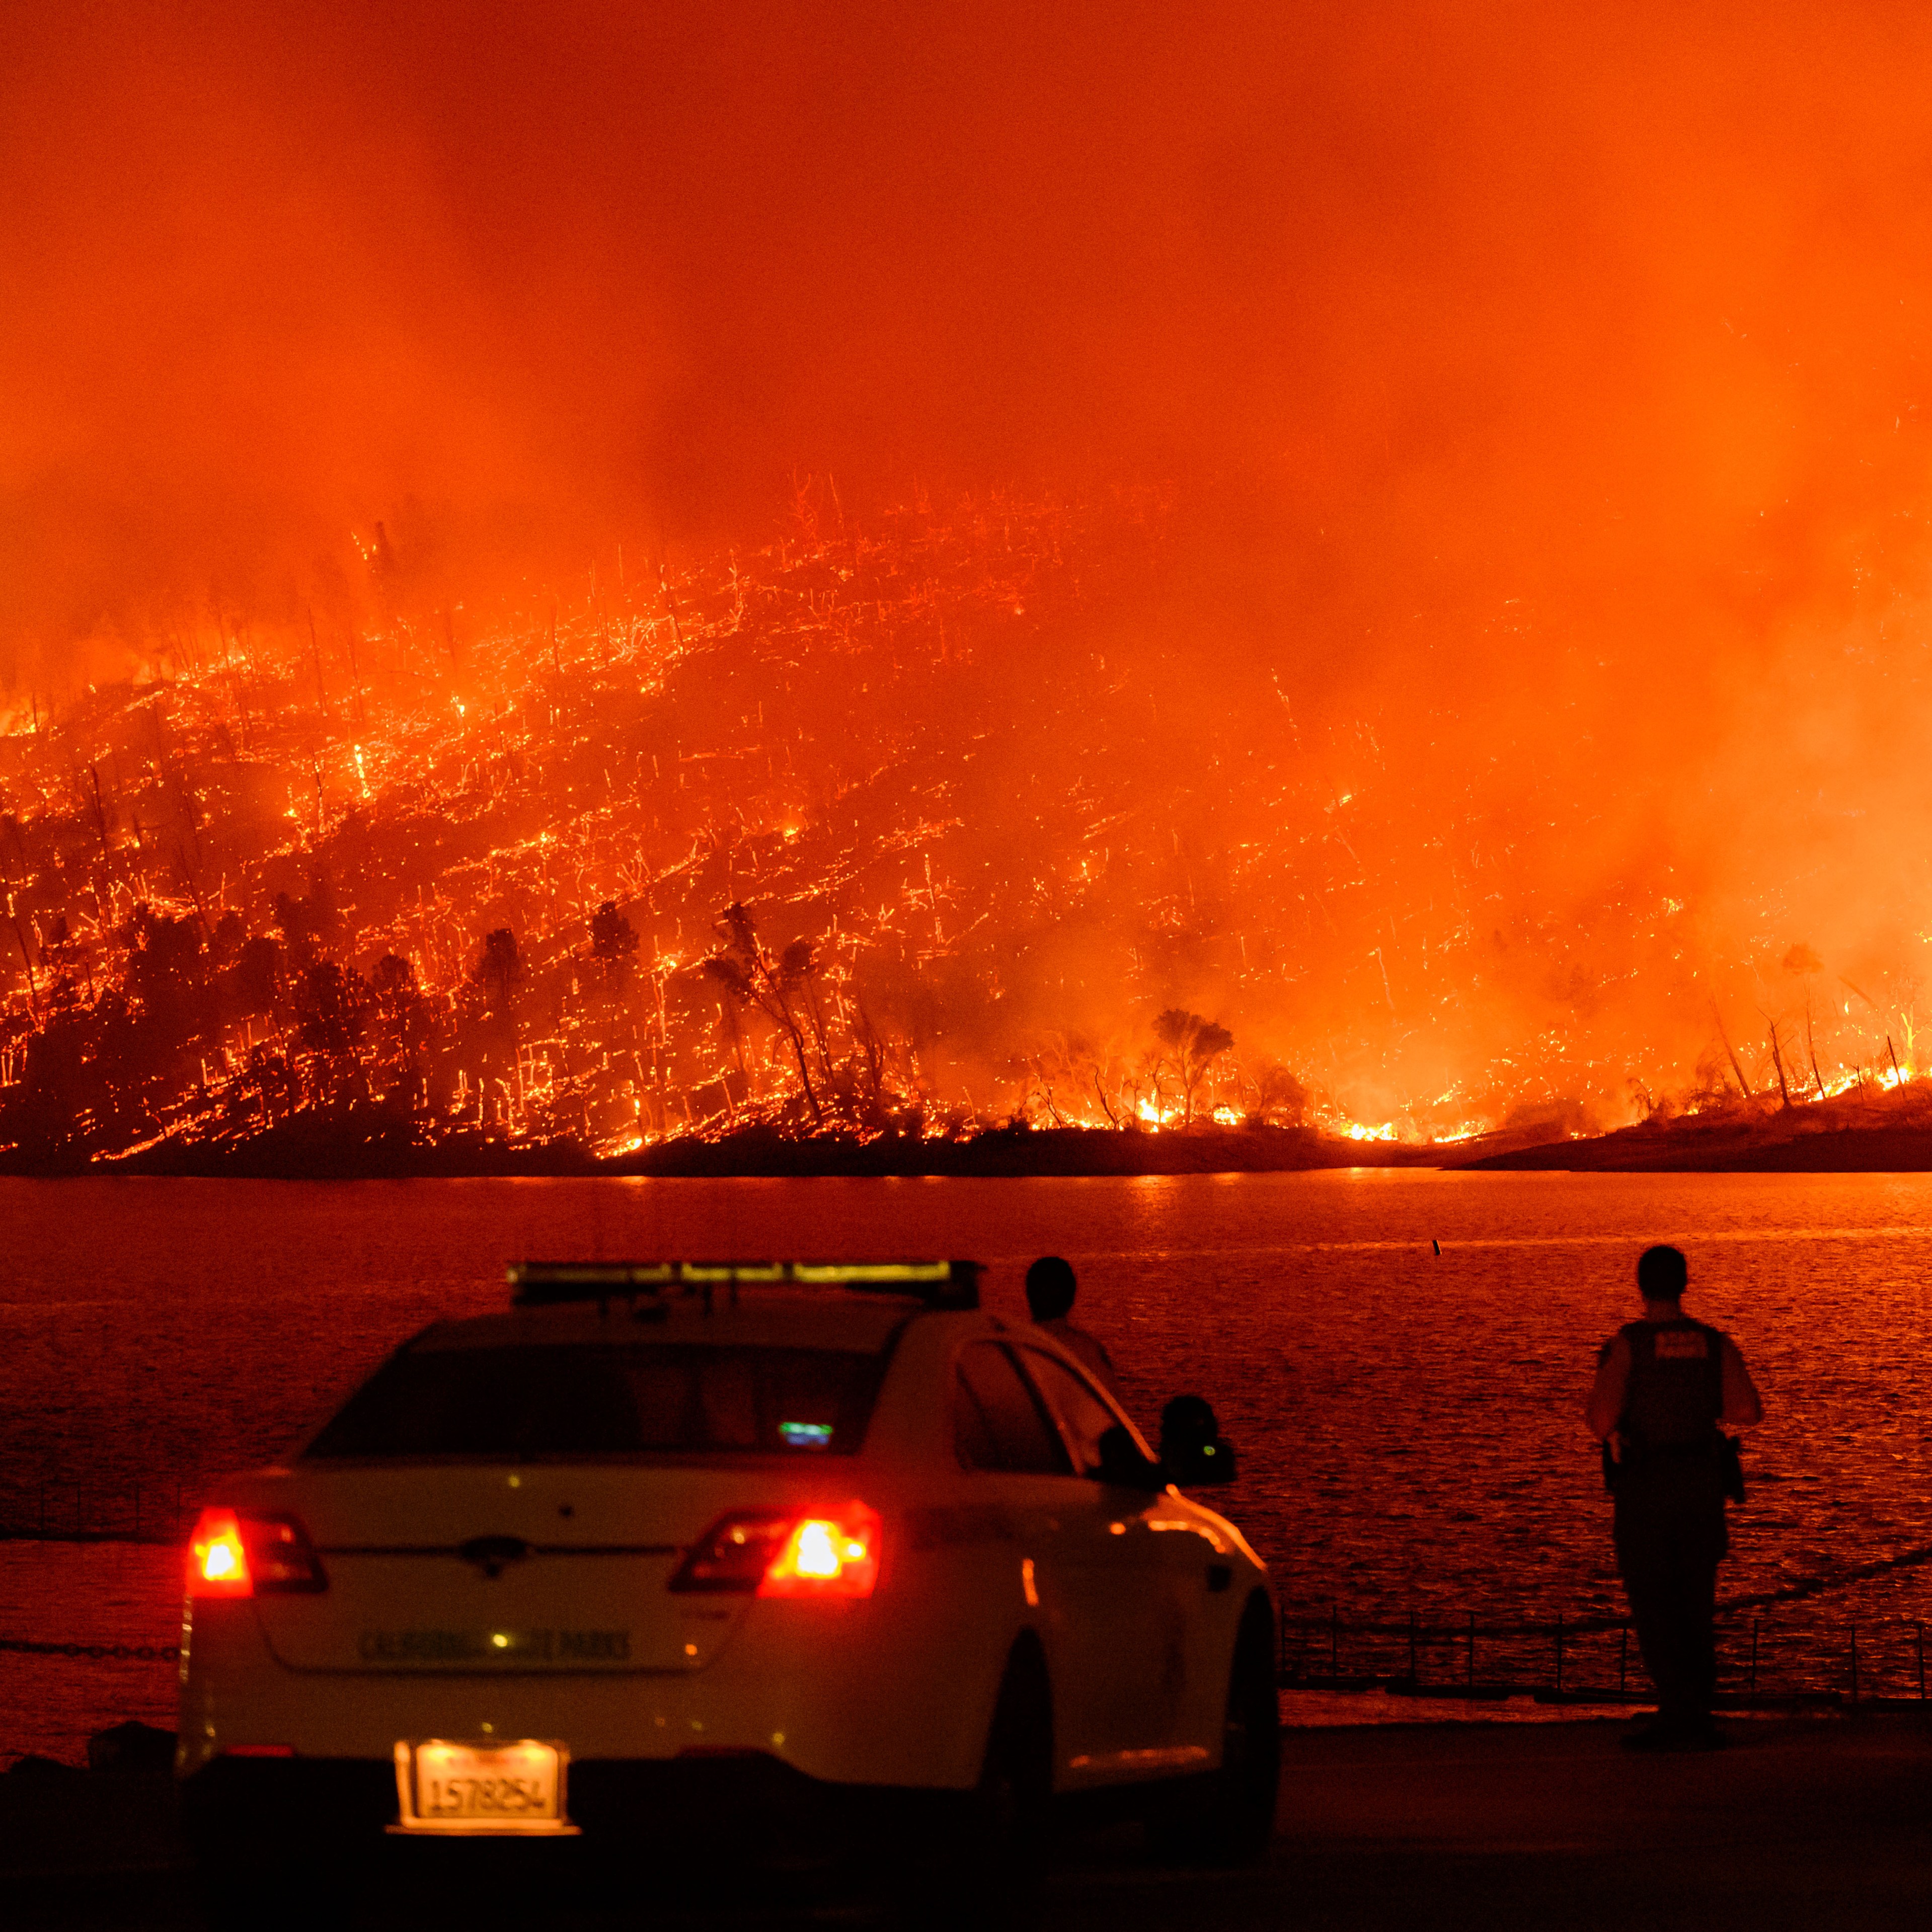 A massive wildfire engulfs a hillside, casting an orange glow across the sky and reflecting off a body of water. Emergency personnel and a vehicle are in the foreground.